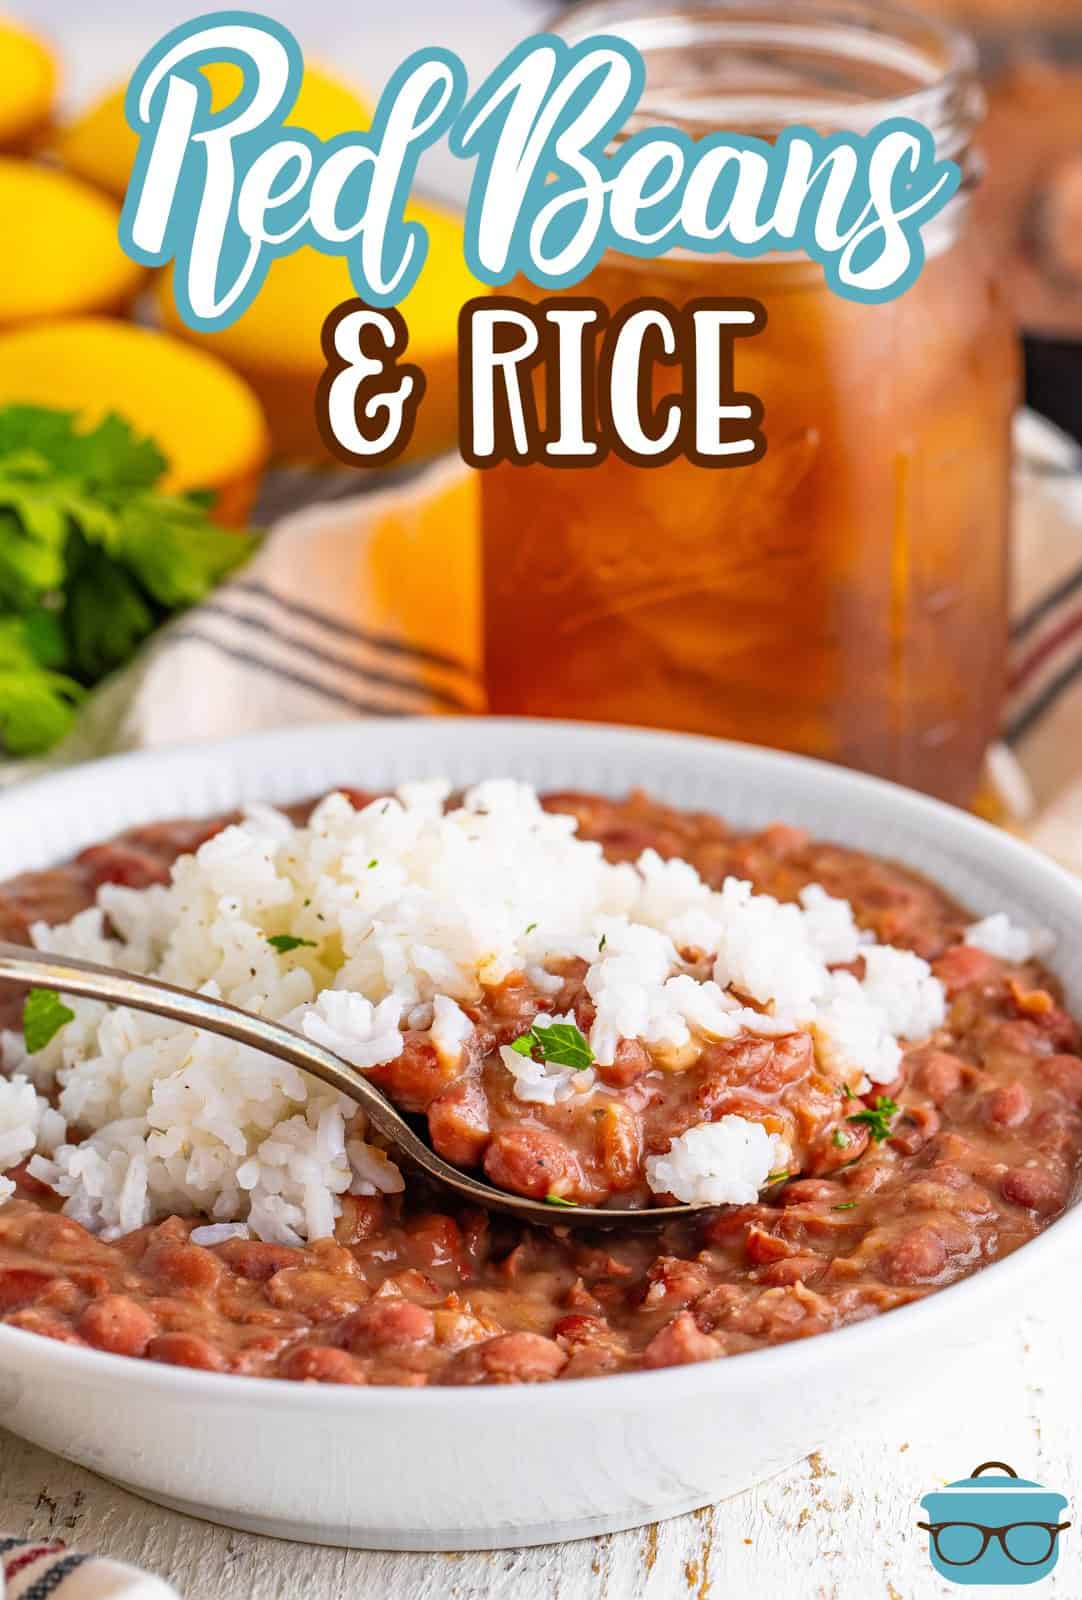 A spoon in a bowl full of Red Beans and Rice.